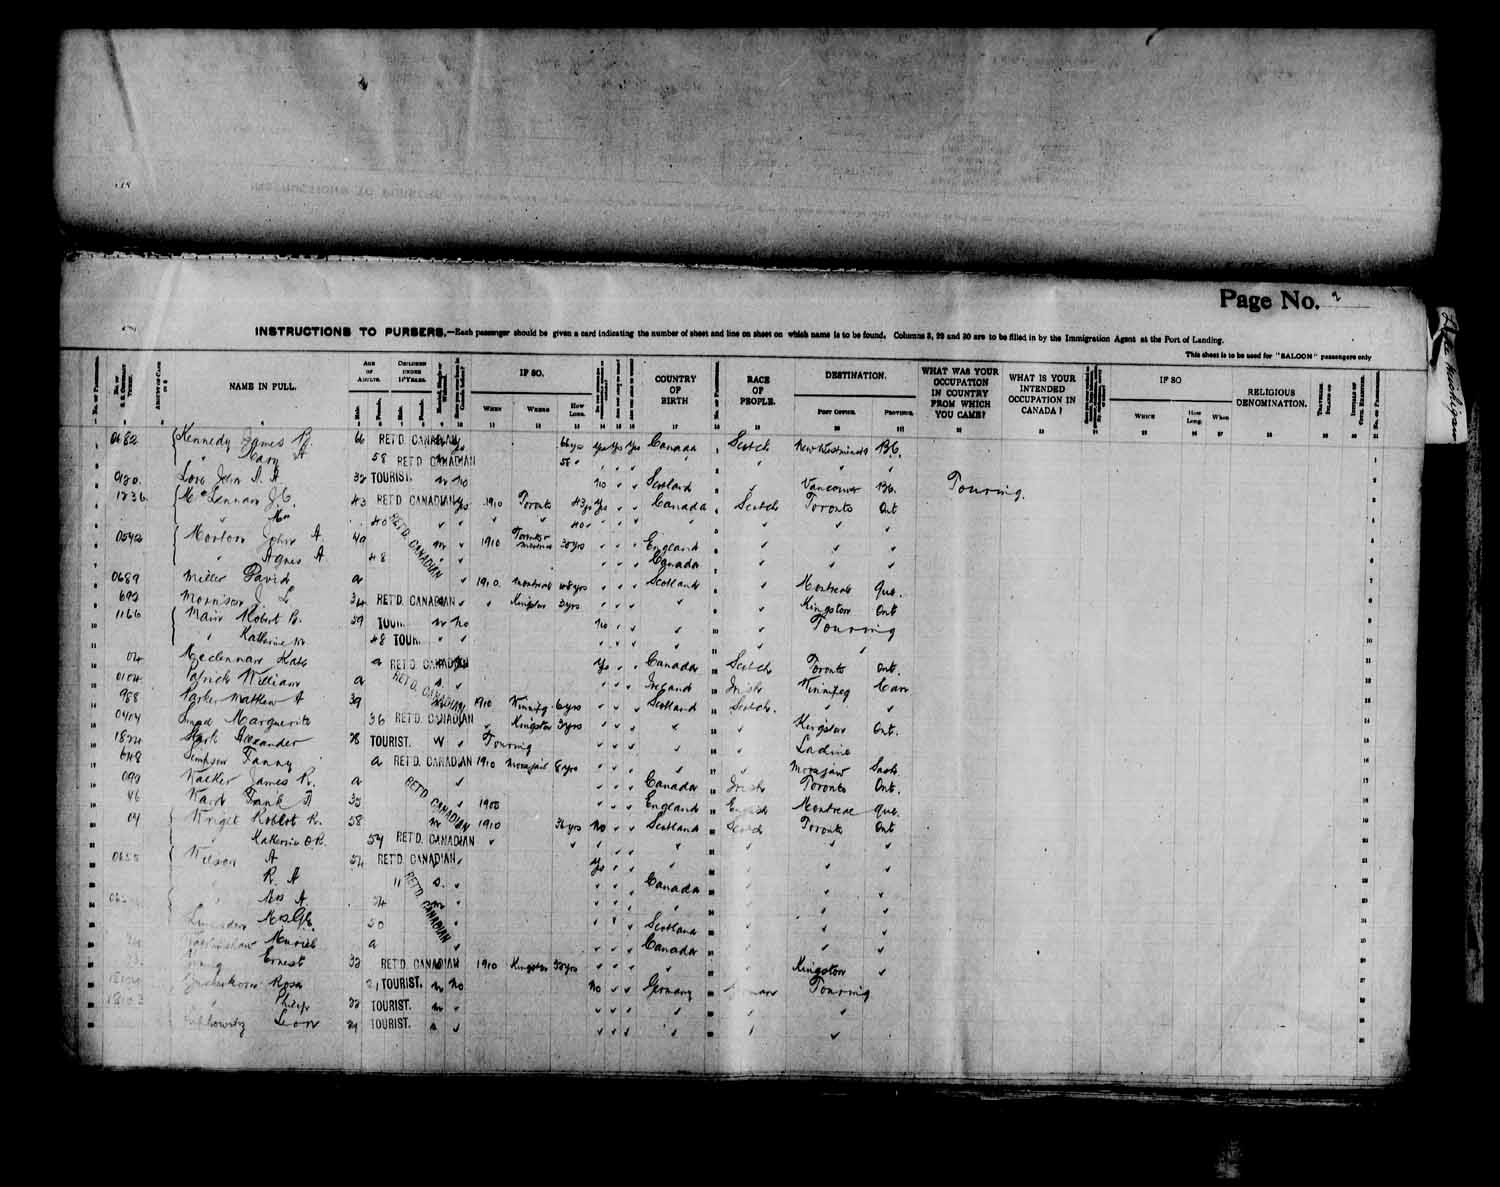 Digitized page of Passenger Lists for Image No.: e003566508